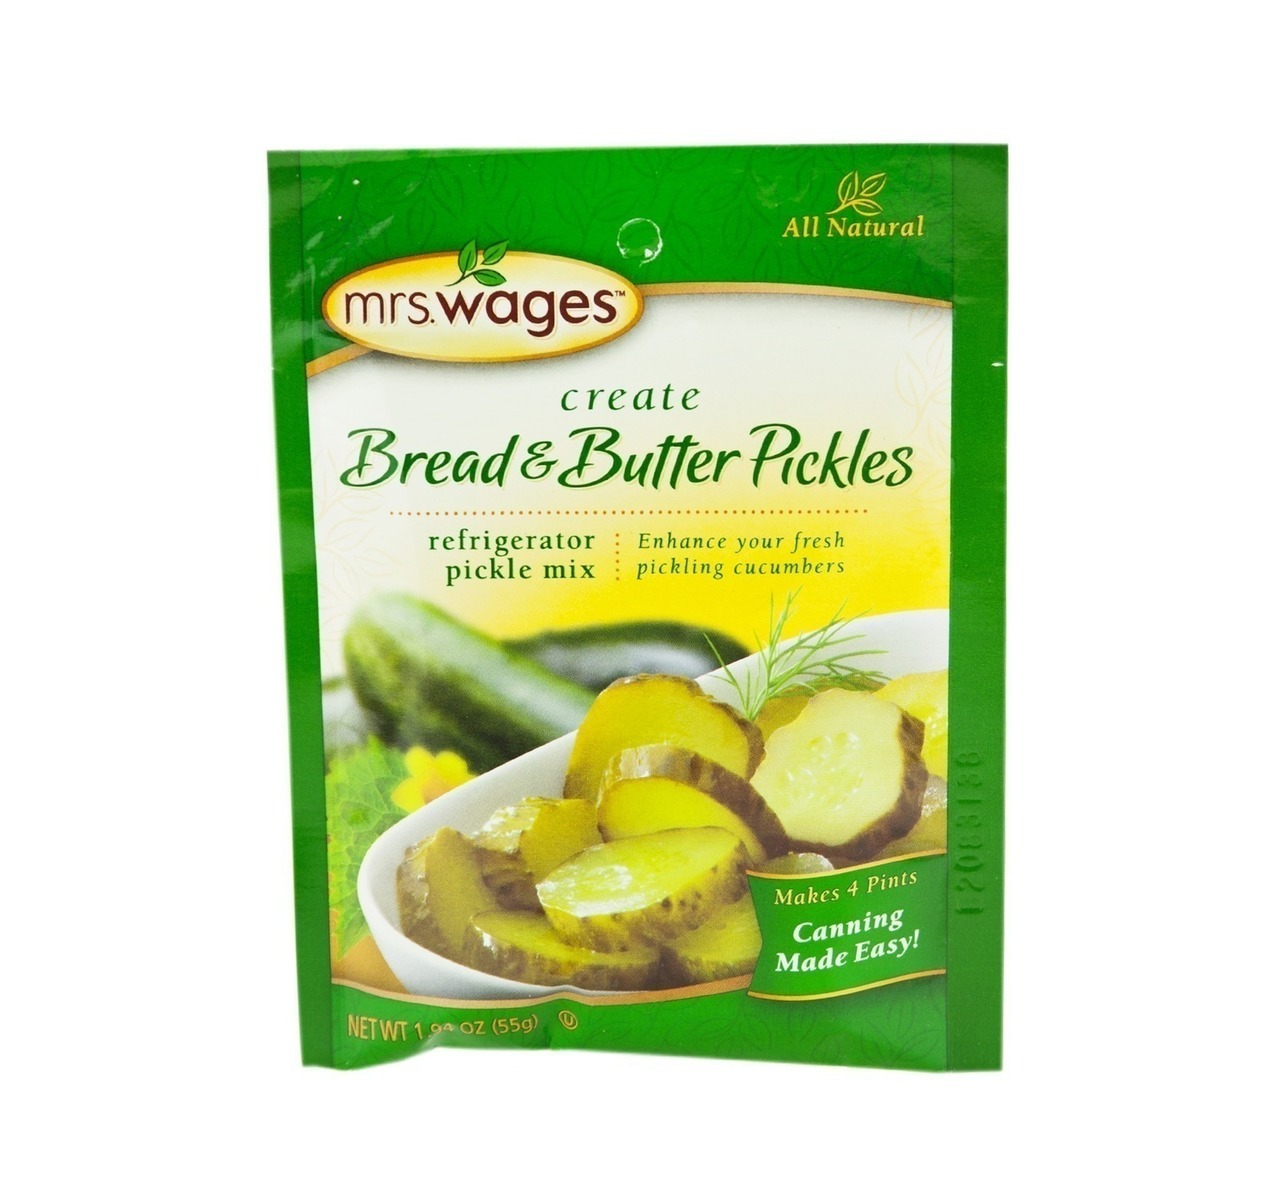 Mrs. Wages Refrigerator Bread & Butter Pickle Seasoning Mix - 1.94 Oz Pouch (Pack of 4)